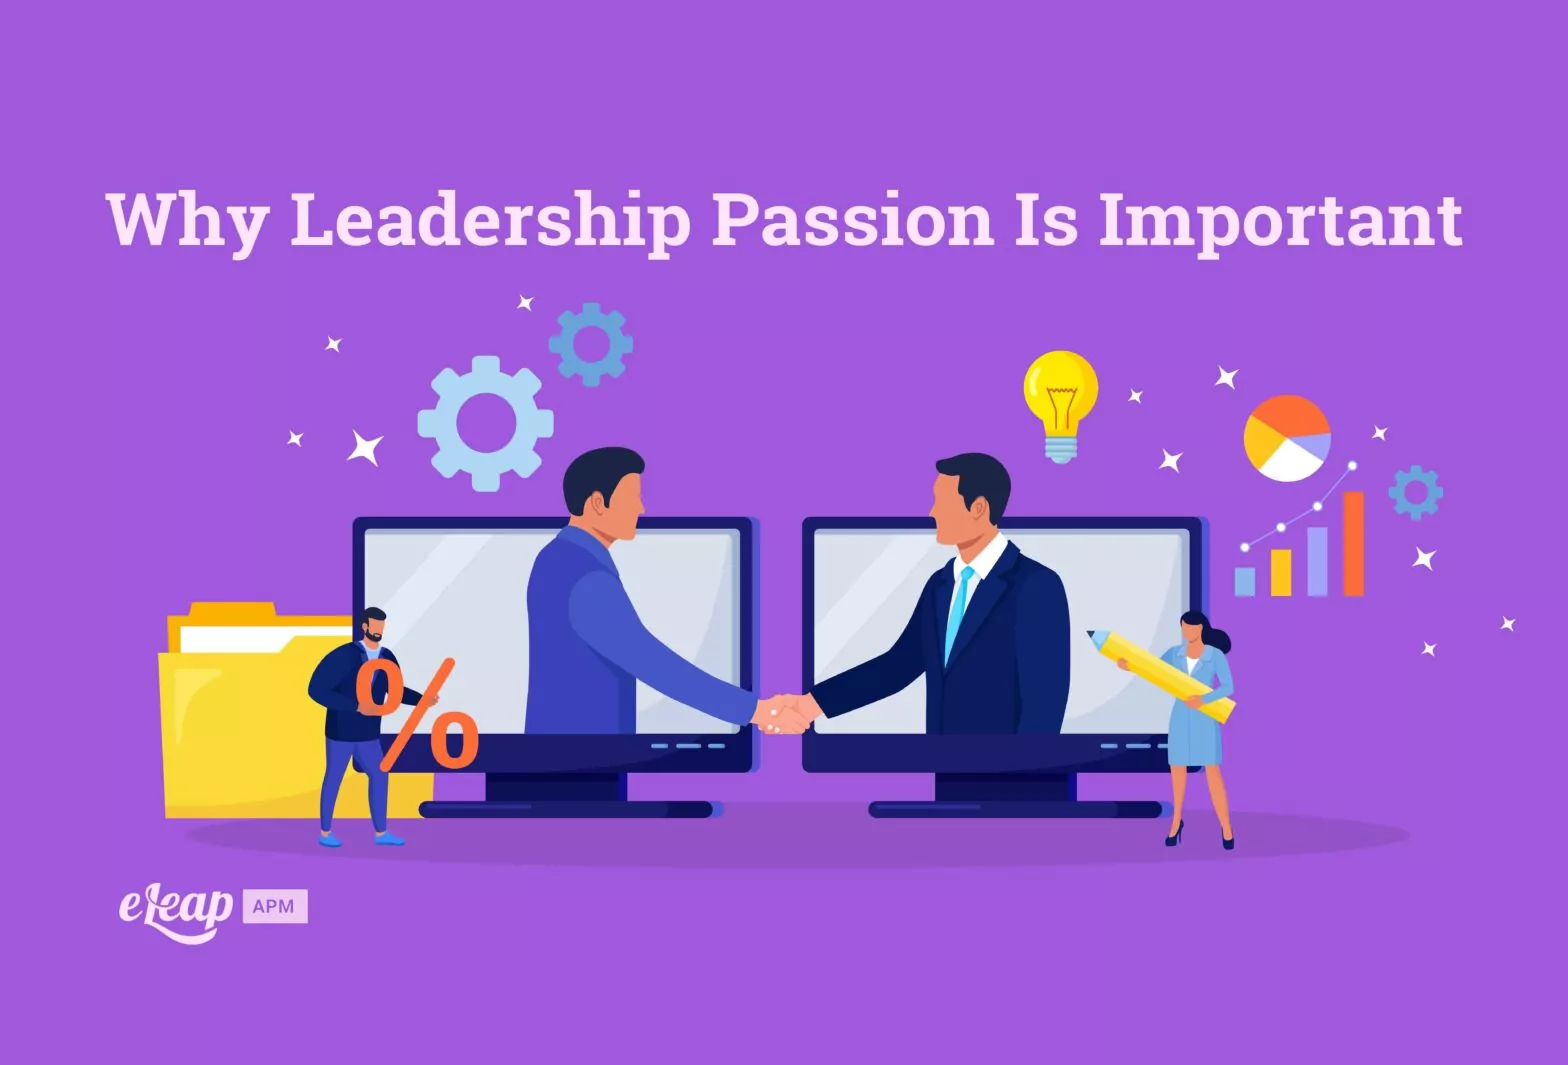 Why Leadership Passion Is Important